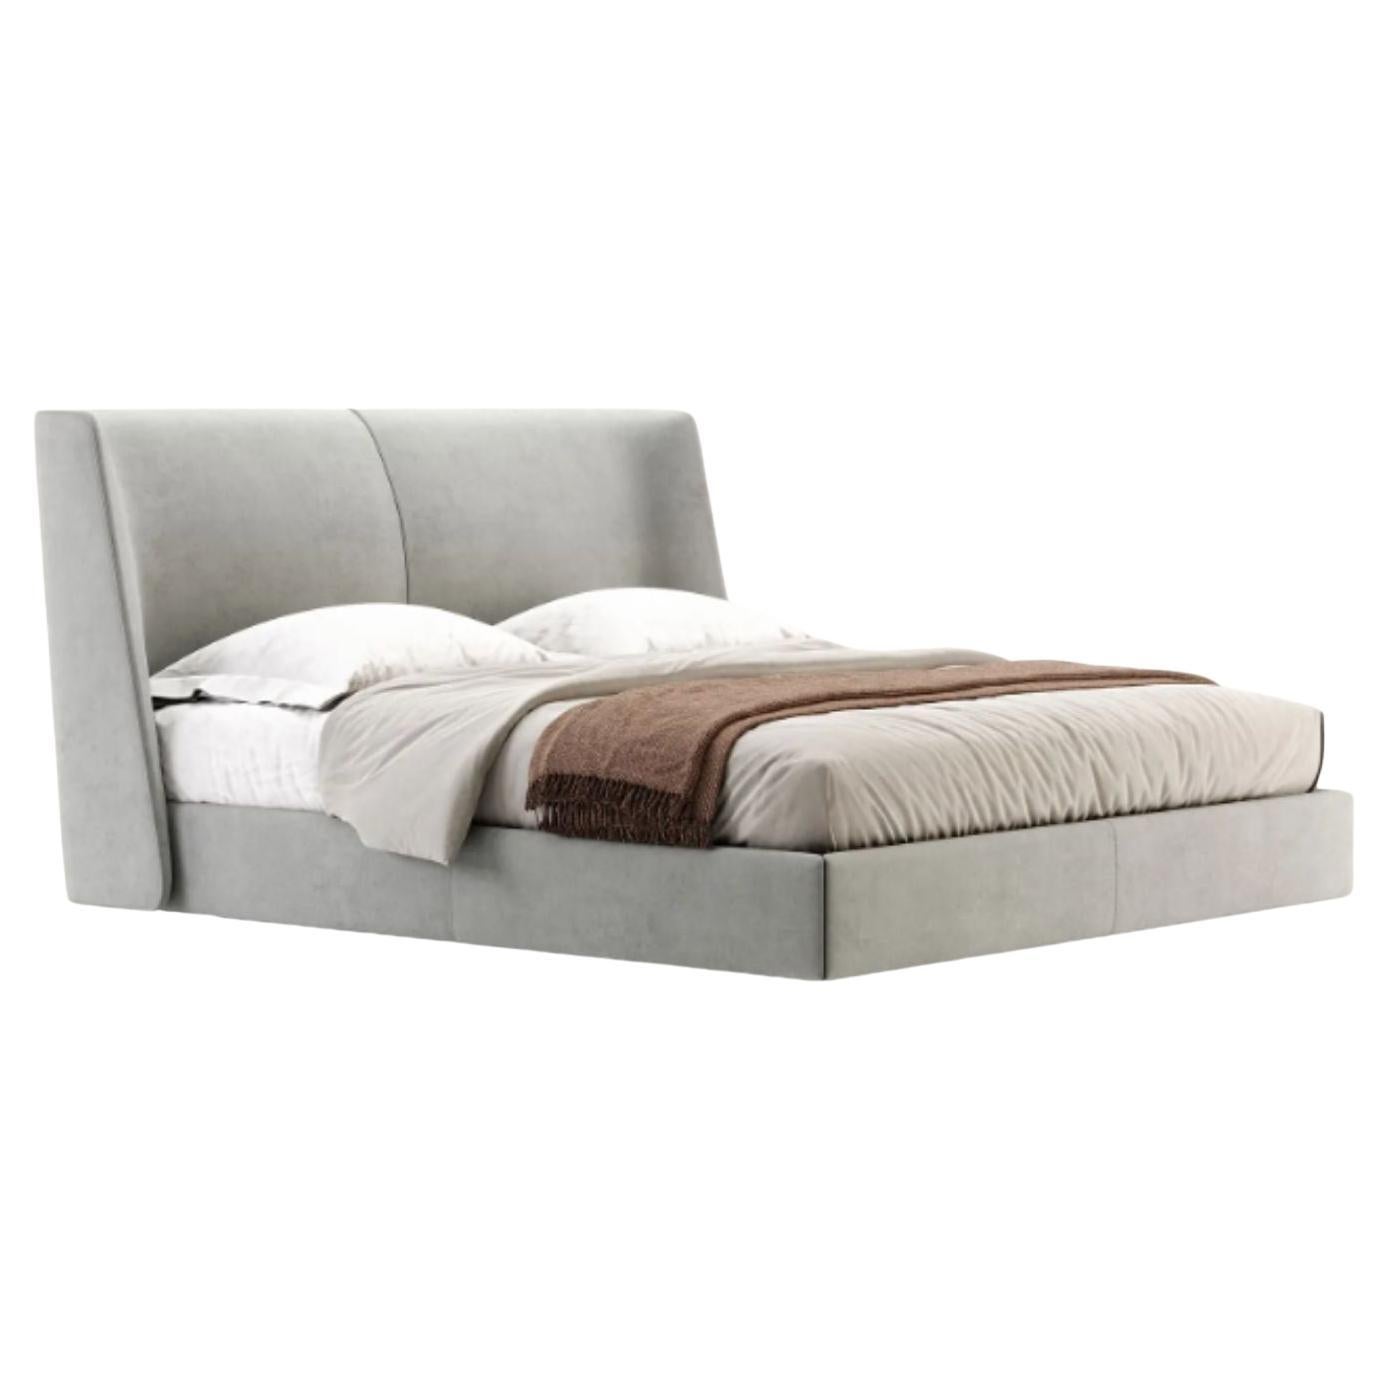 Queen Size Echo Bed by Domkapa For Sale